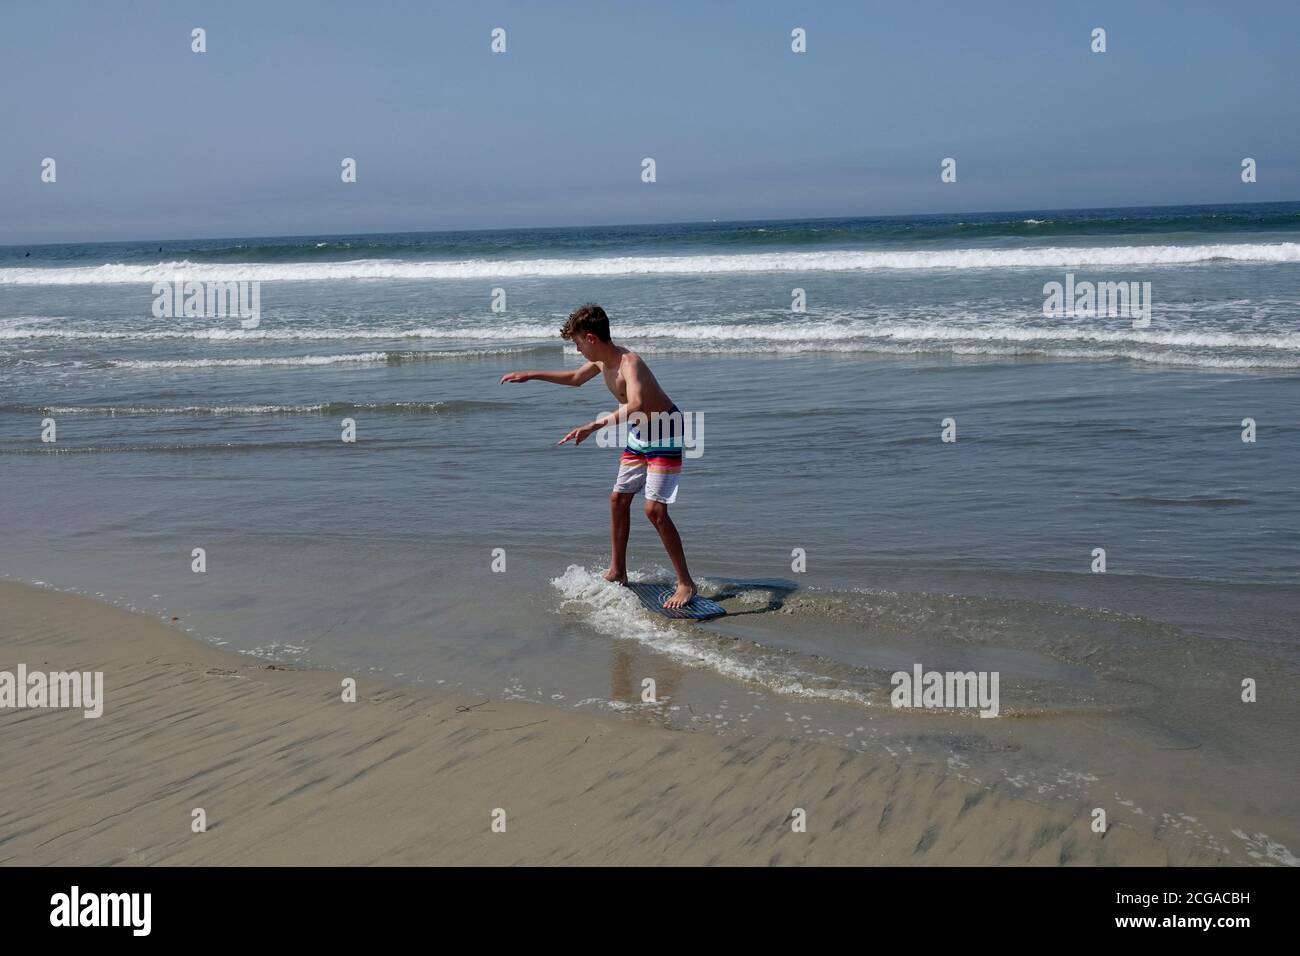 A teenage boy goes skim boarding on the waves closest to the beach shoreline. Stock Photo